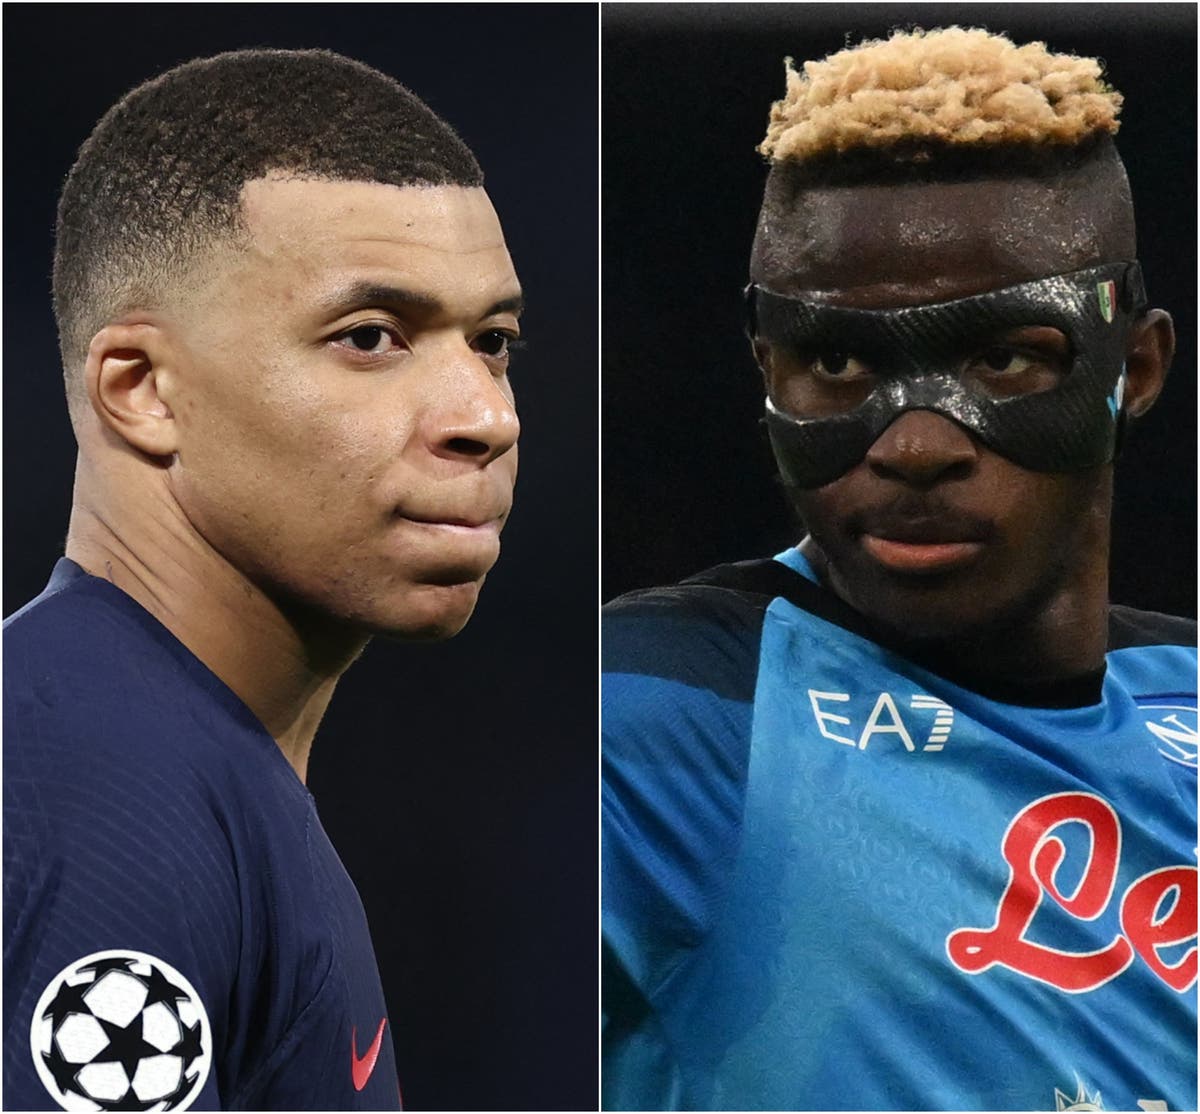 Chelsea exploring Victor Osimhen transfer alternatives as PSG target Kylian Mbappe replacement